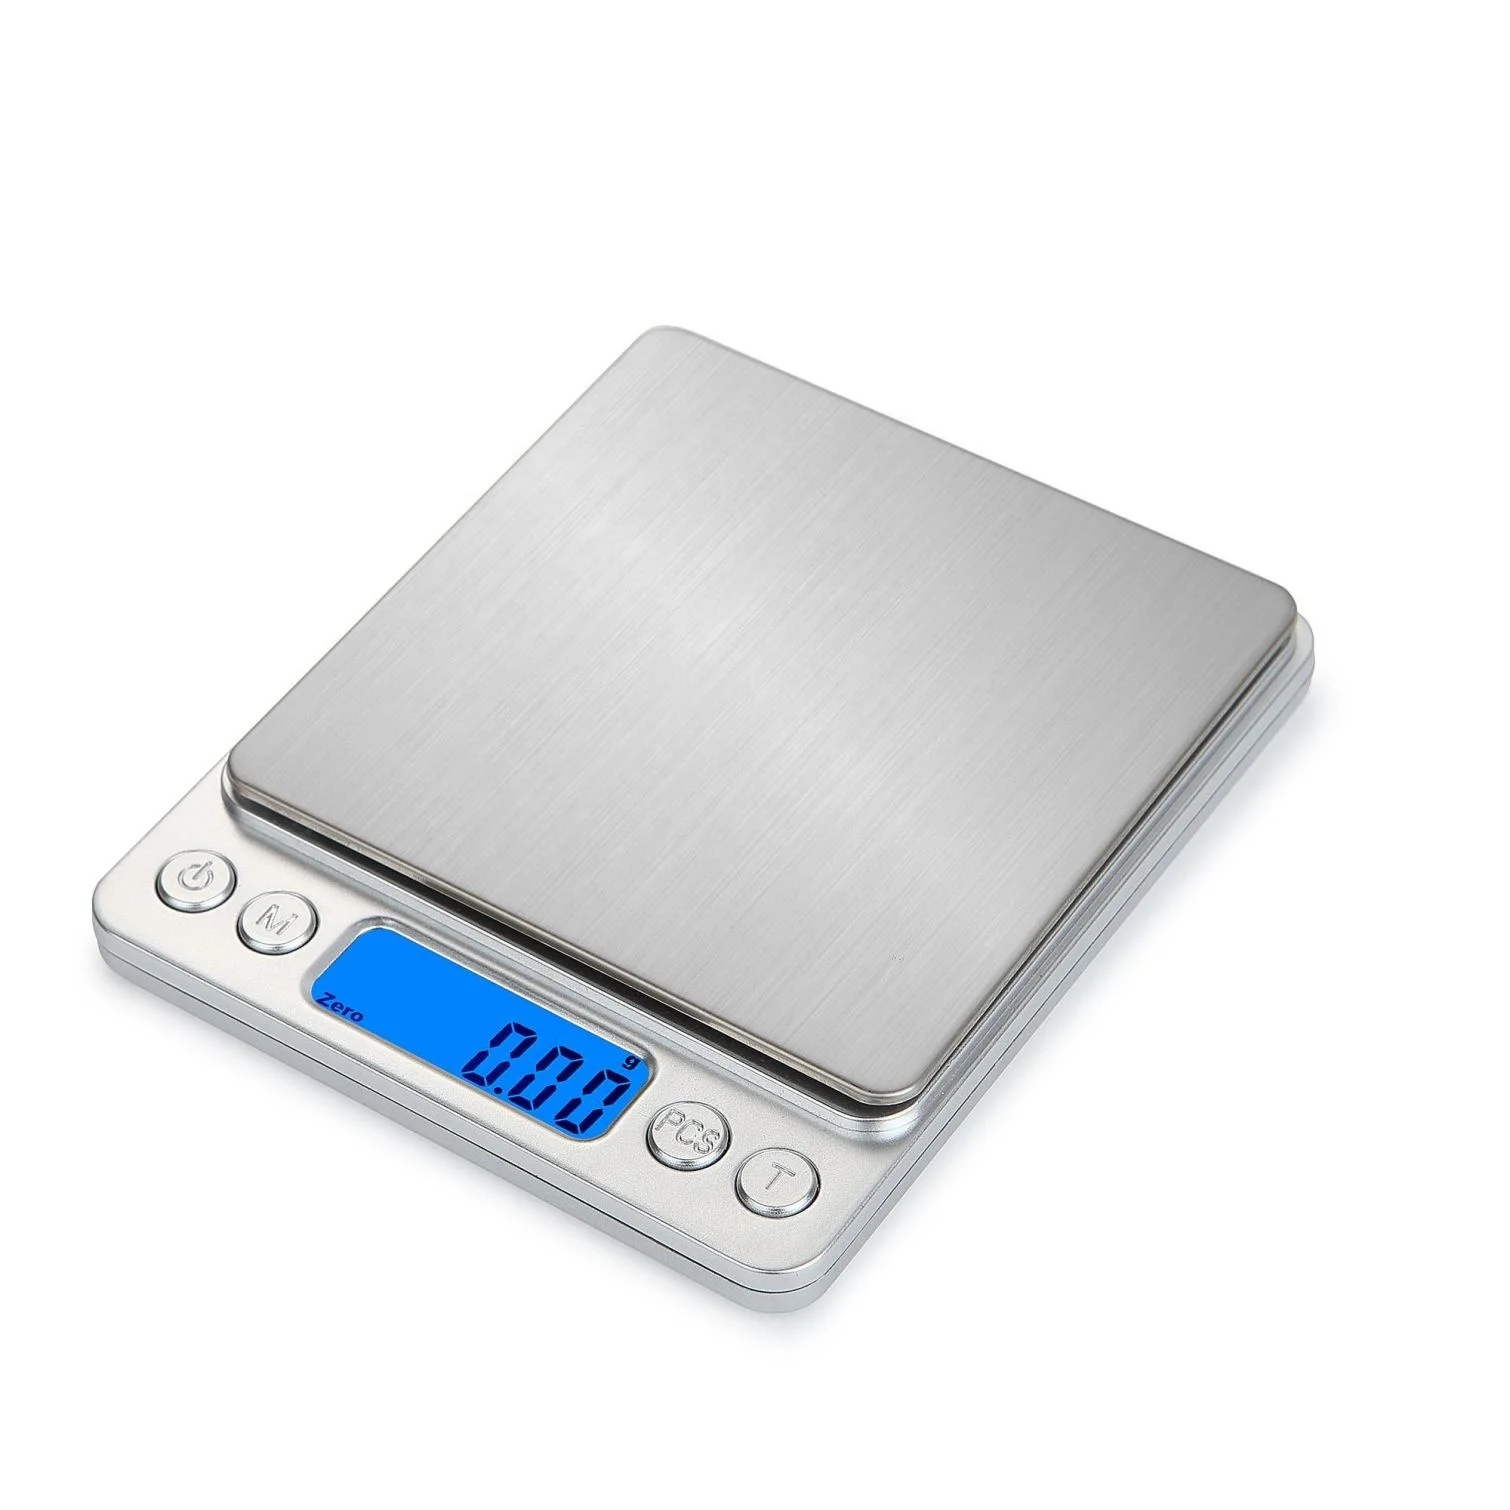 

Hot Selling Kitchen Digital Pocket Mini Display Lcd Weighing Scale For Sale The Biggest Loser, Sliver